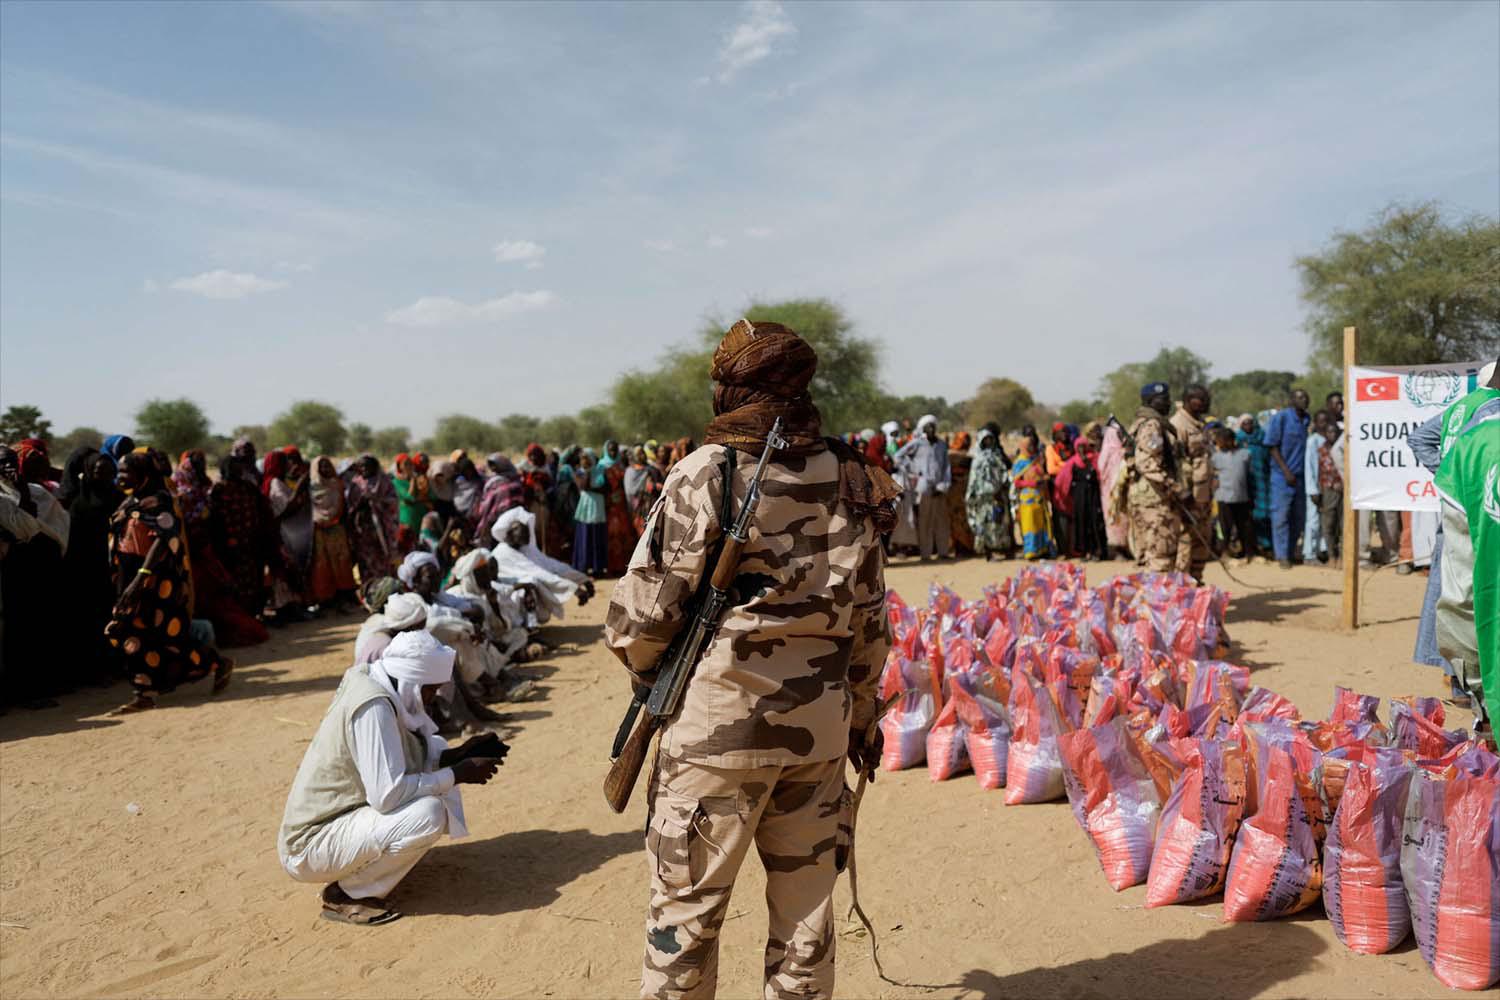 The US has contributed more than half the funding for Sudan